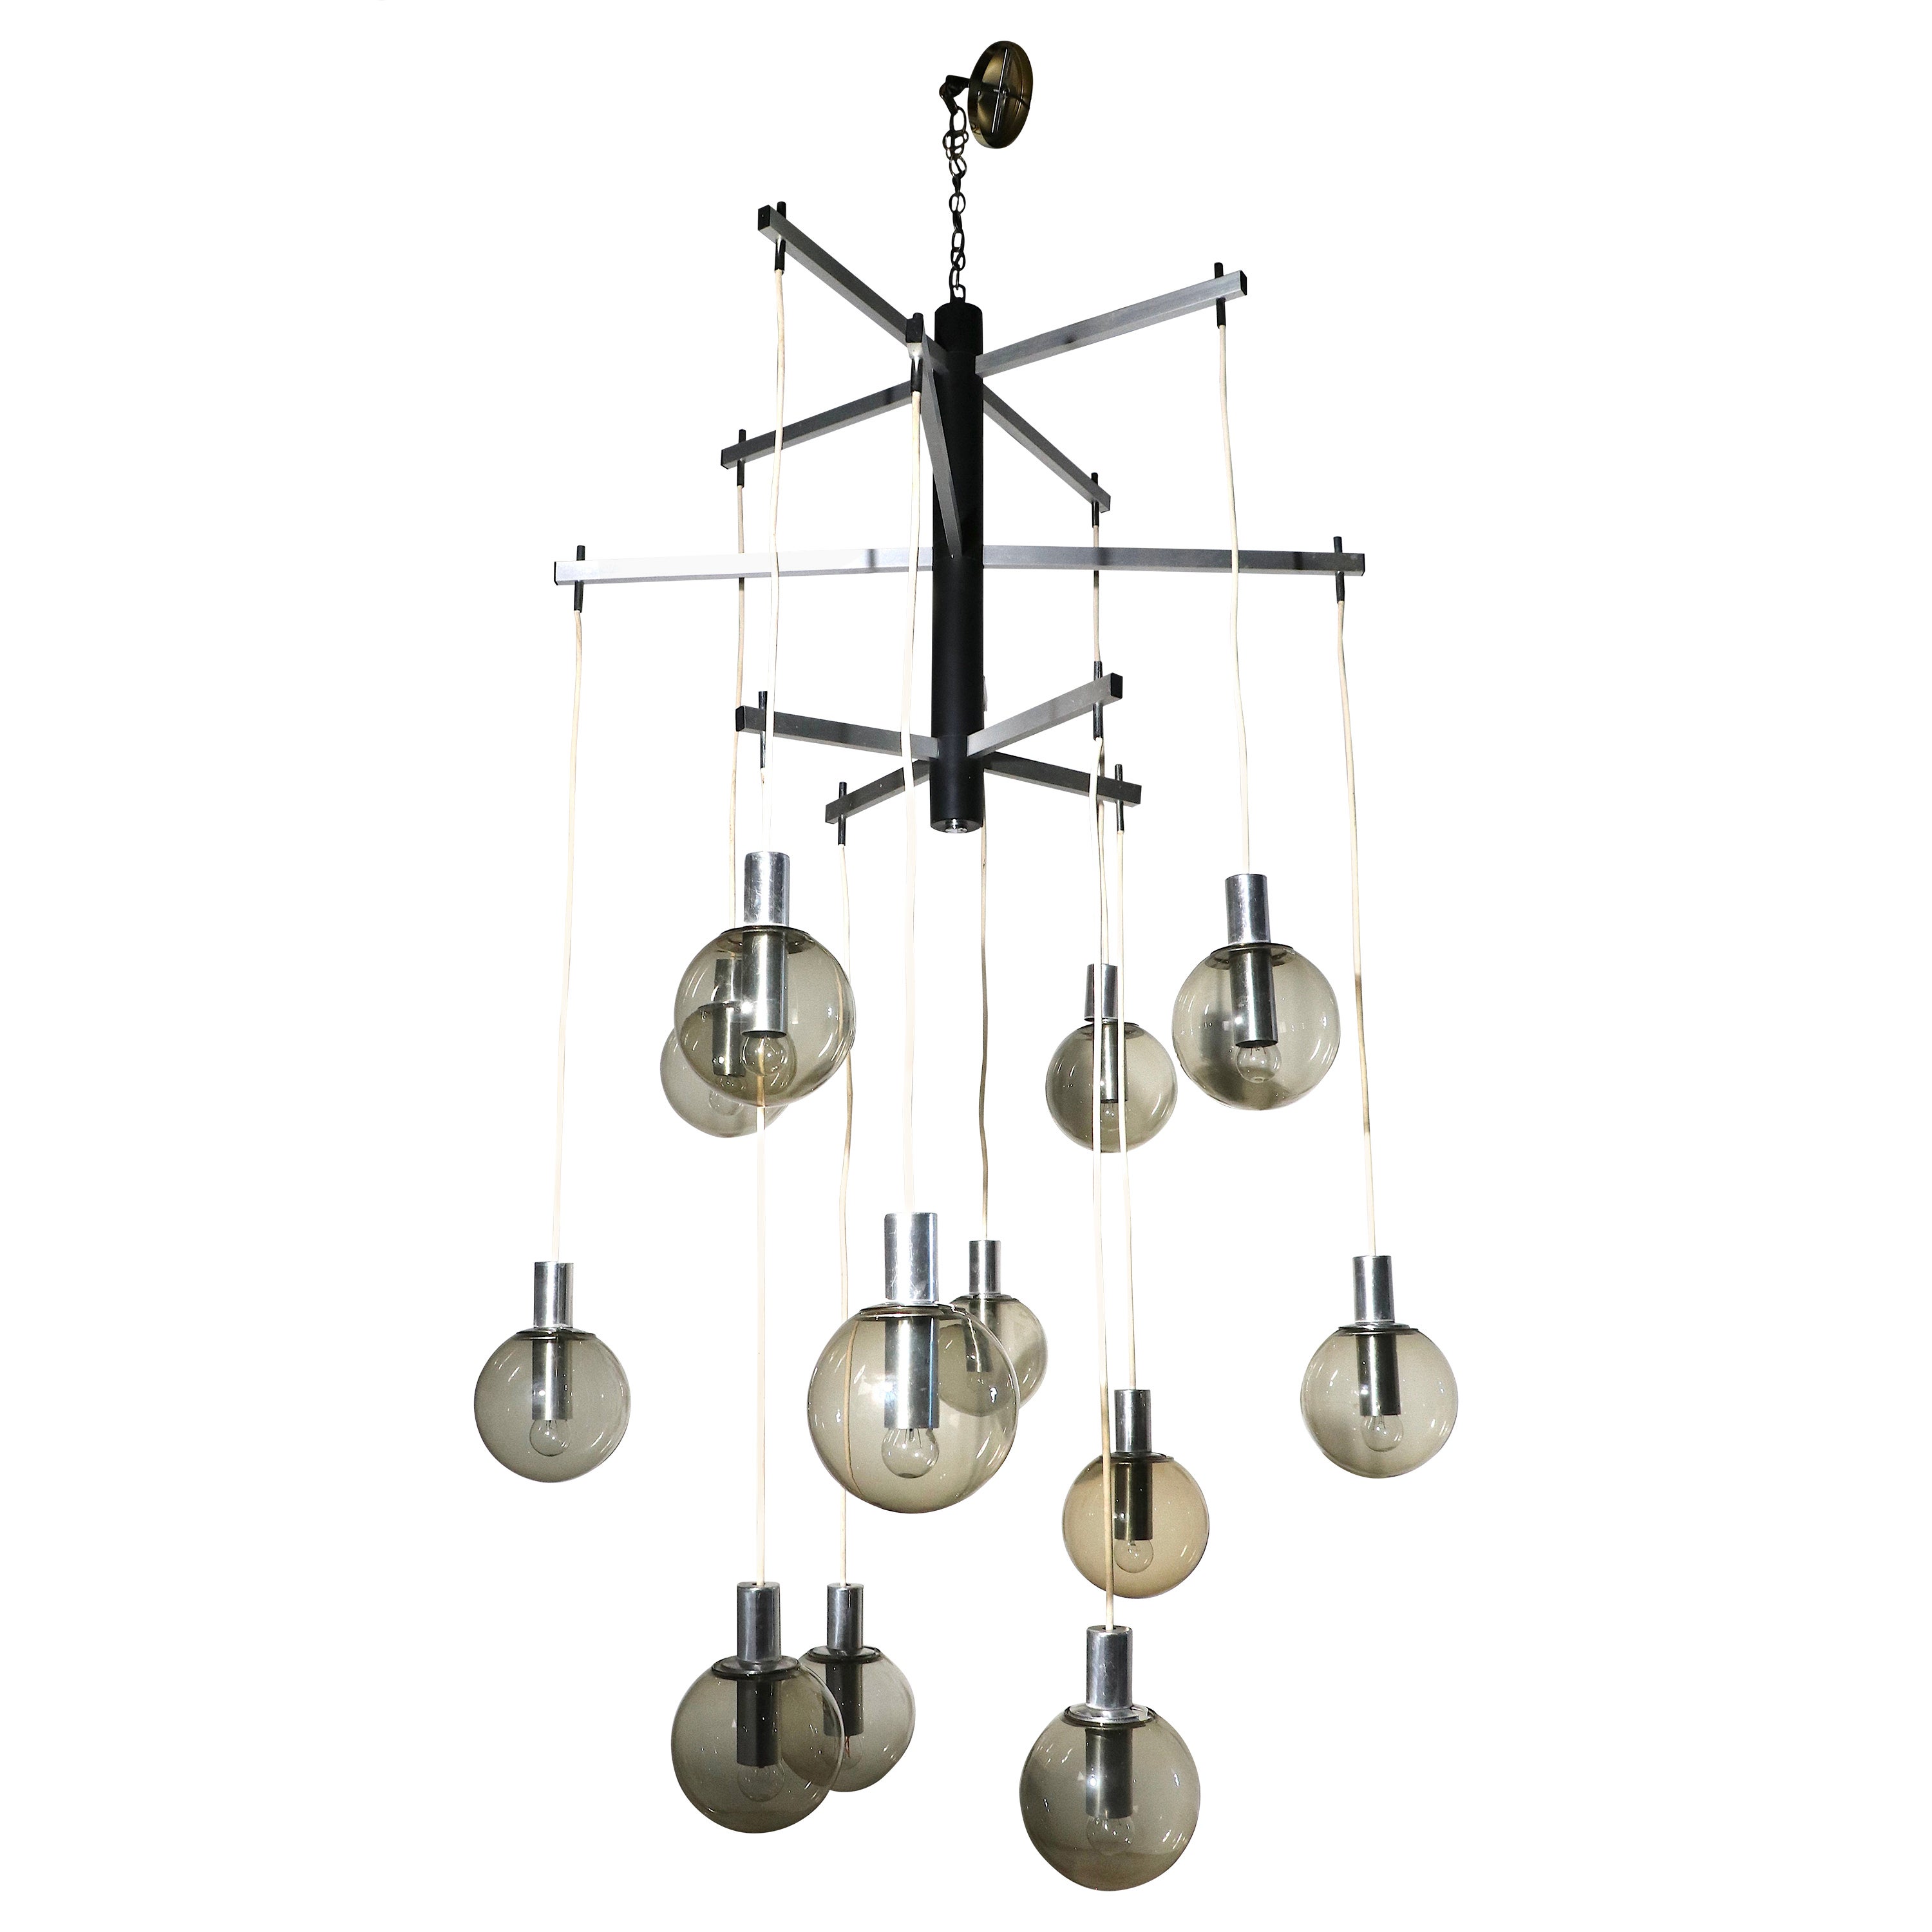 Large Modernist 12 Light Chandelier with Tinted Glass Ball Shades Ca. 1970's For Sale